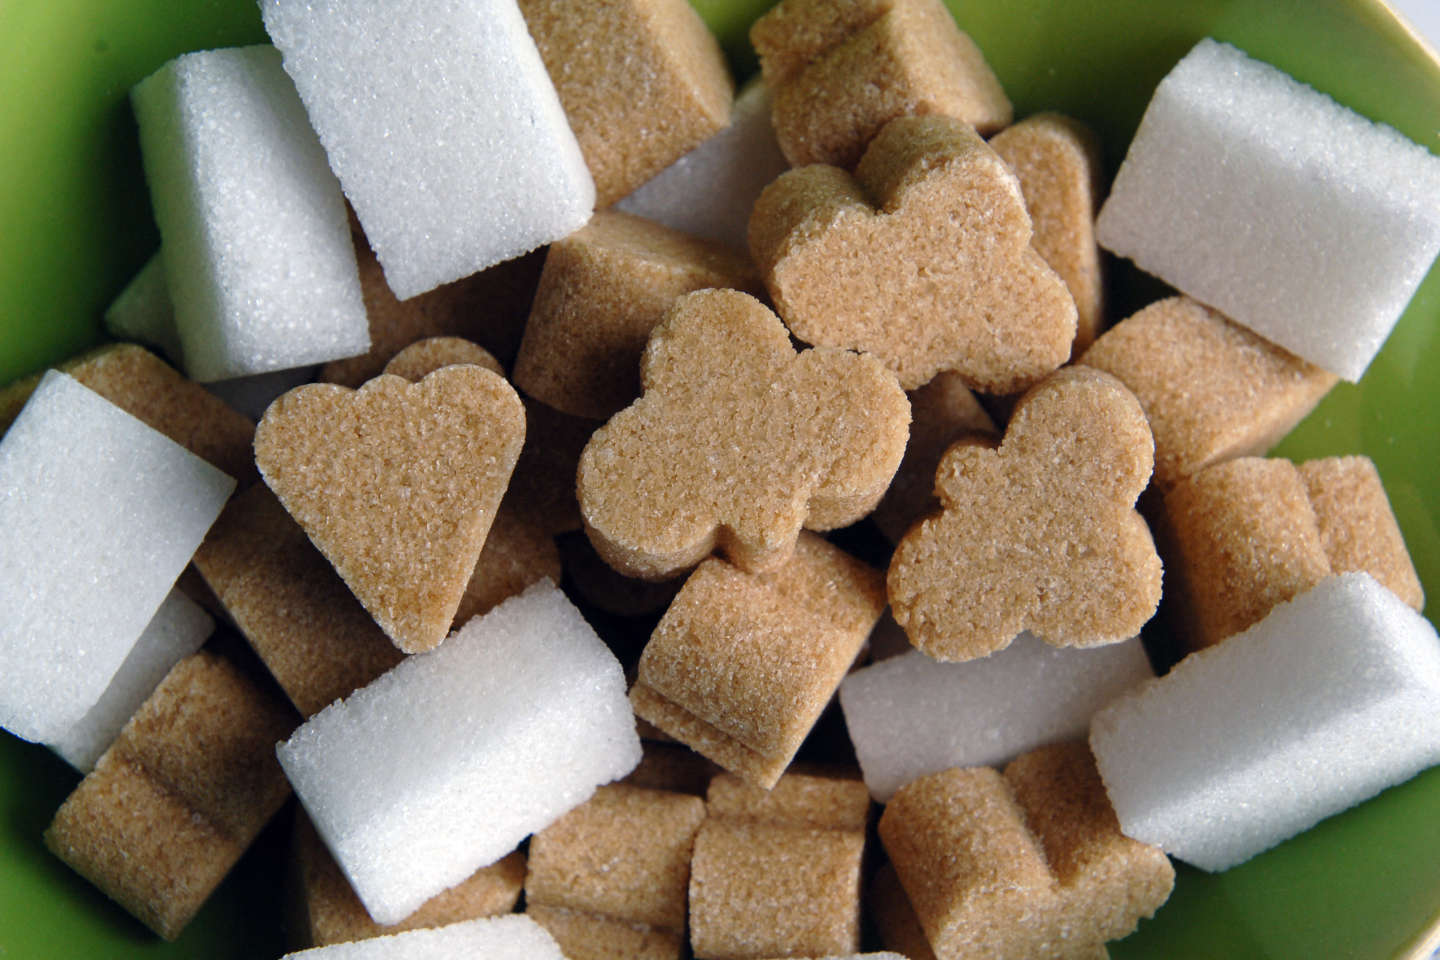 “On the rise, sugar is sailing against the tide of other agricultural commodities”